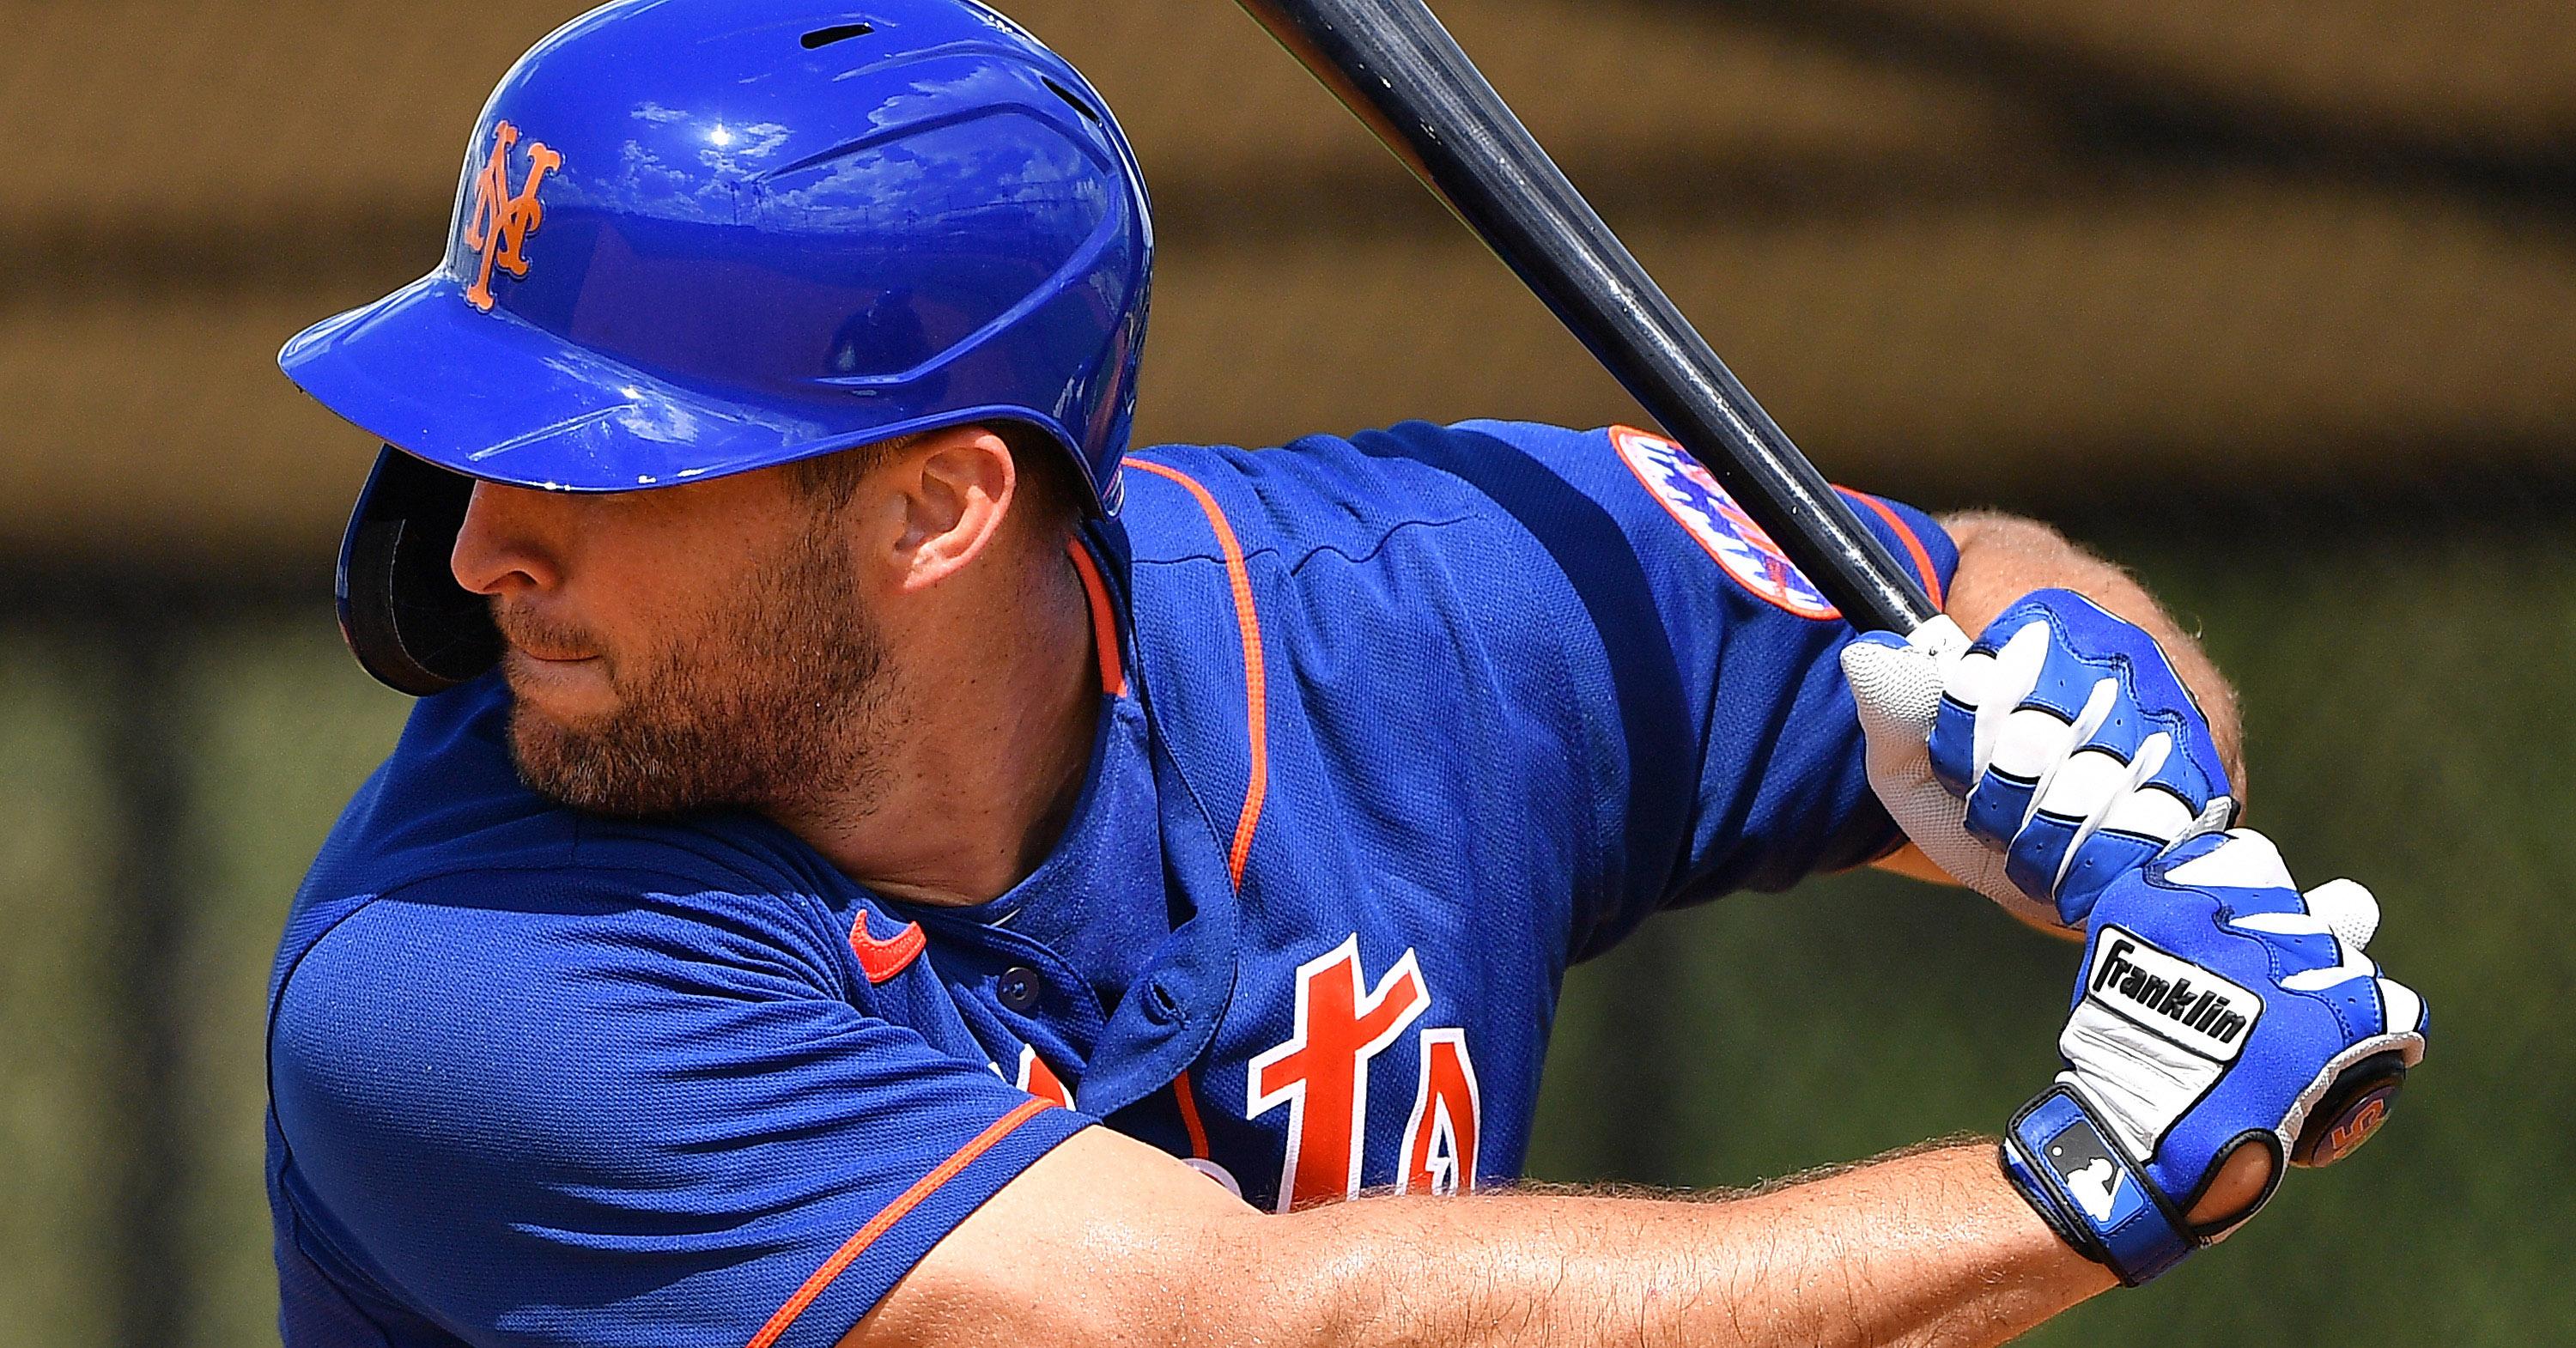 Mets minor leaguer Tim Tebow retires from pro baseball